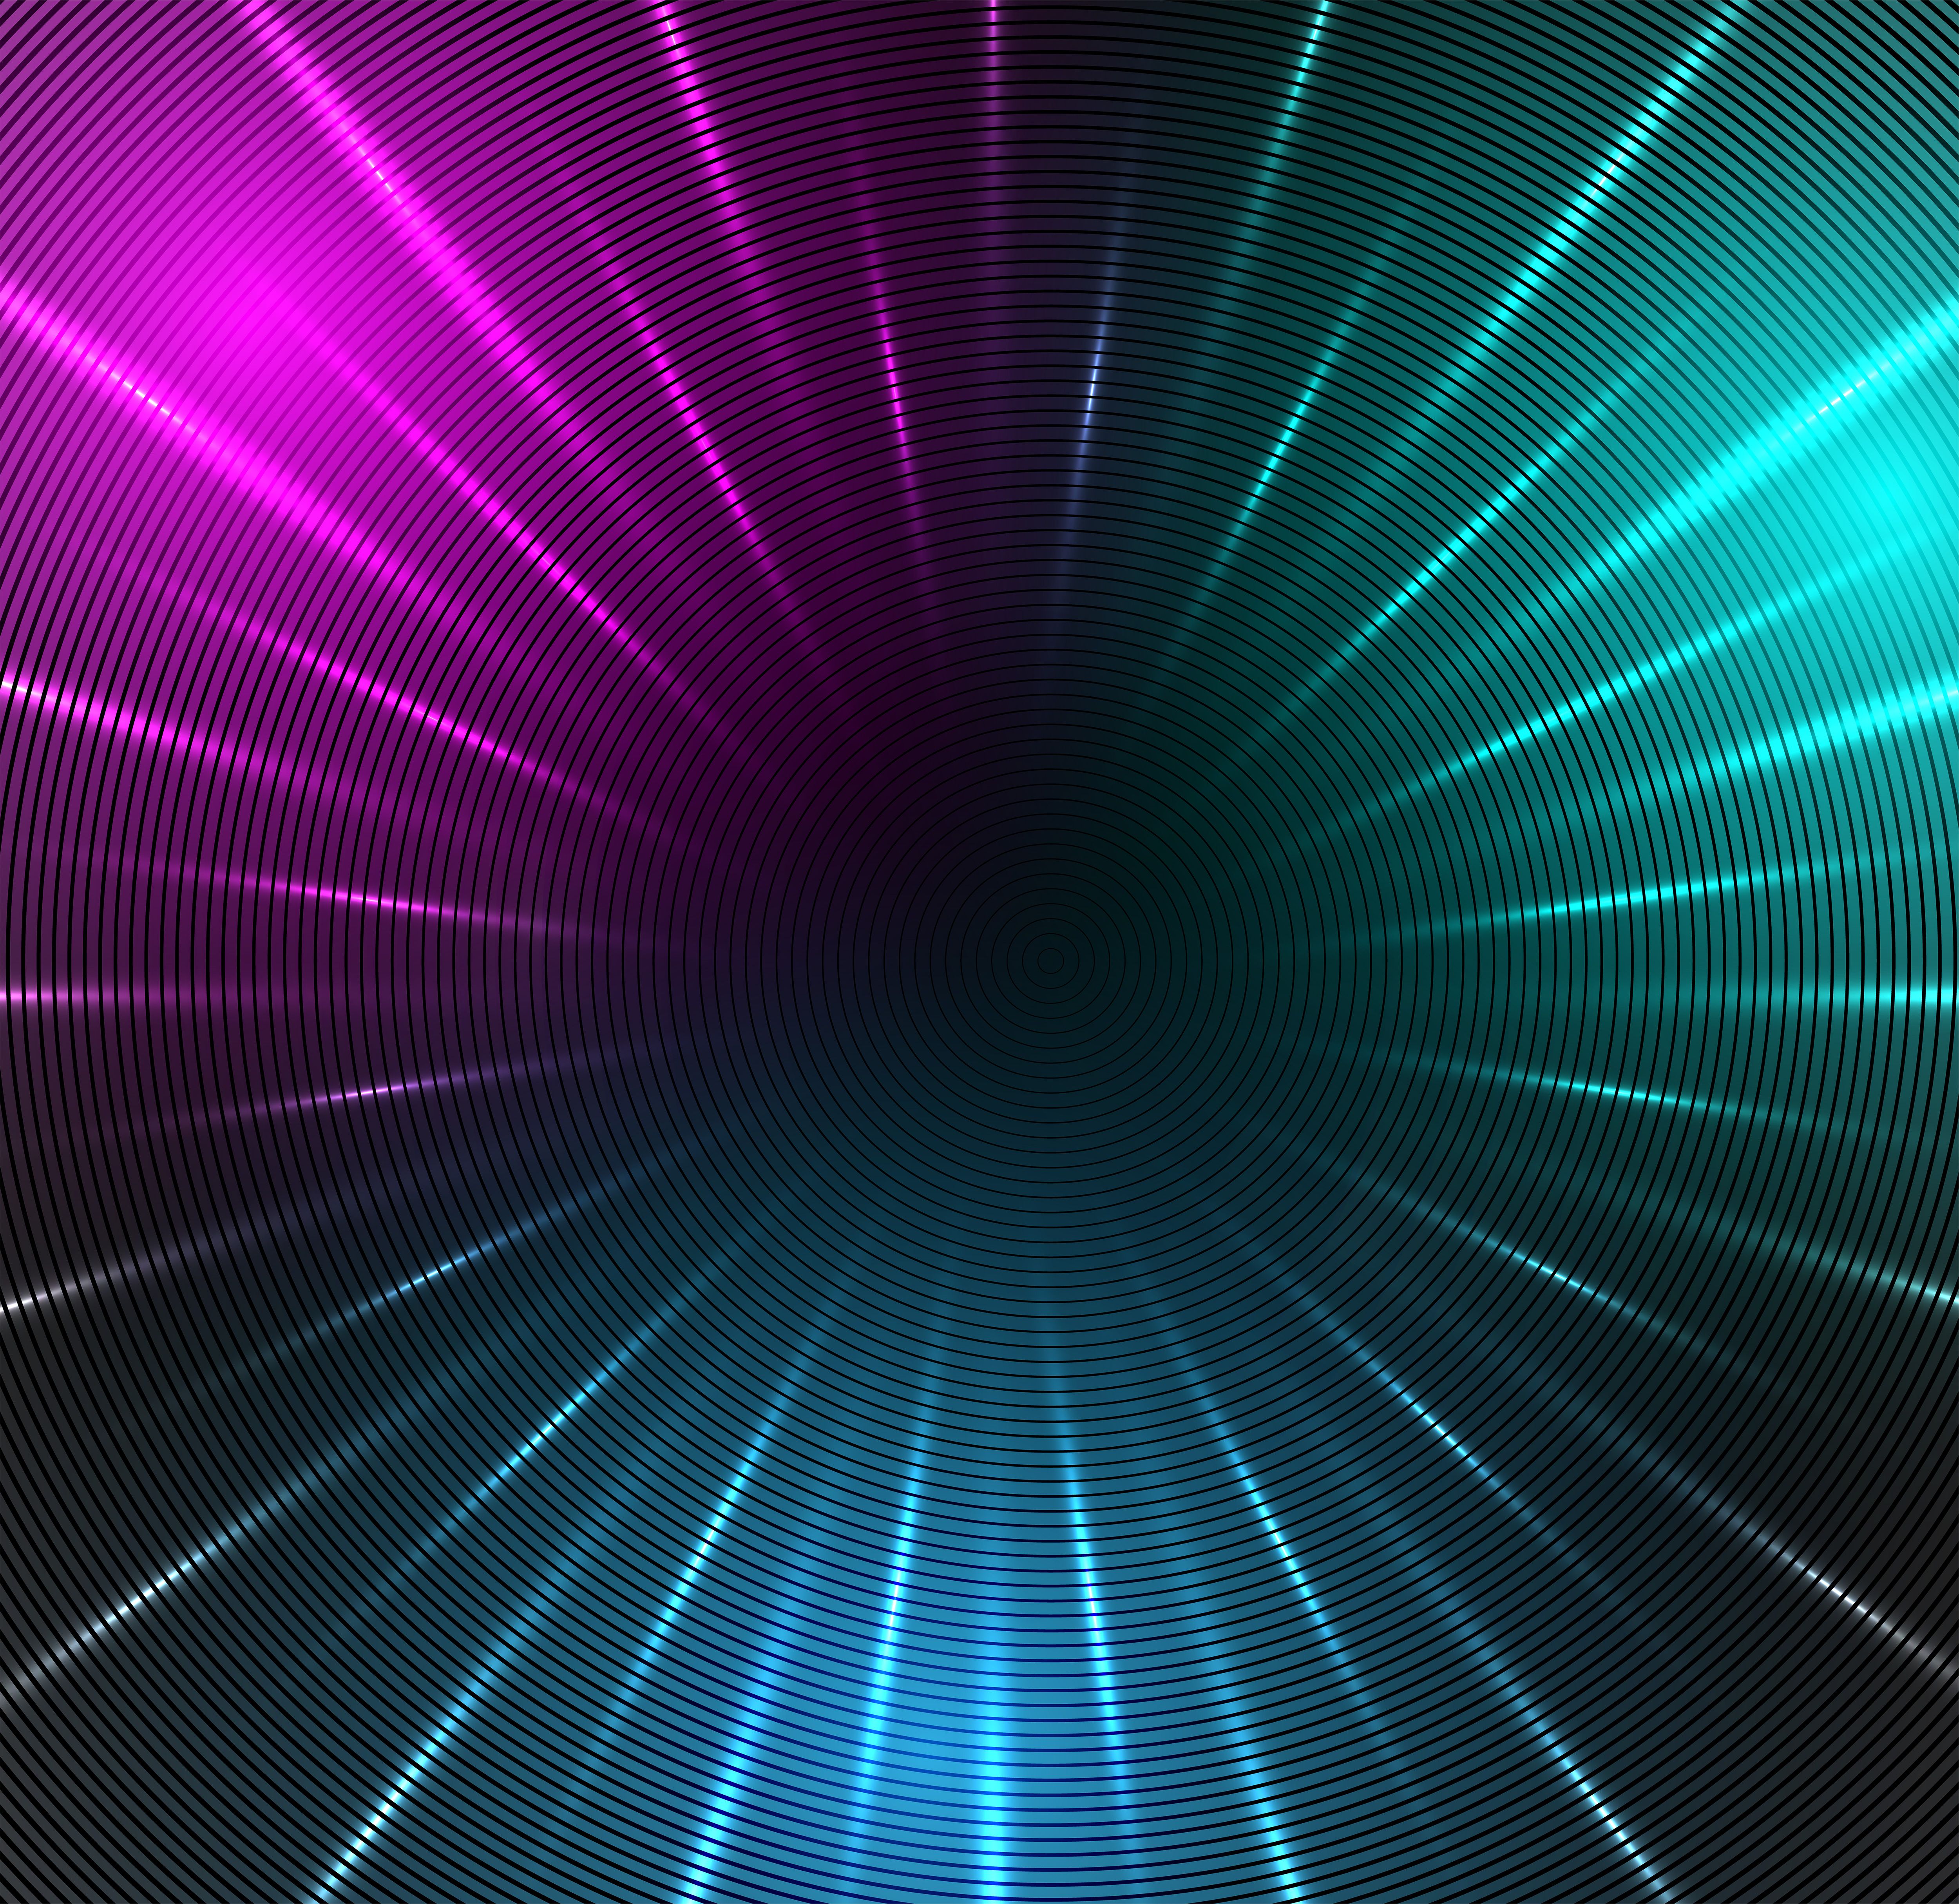 Neon Background Png & Free Neon Background.png Transparent Image